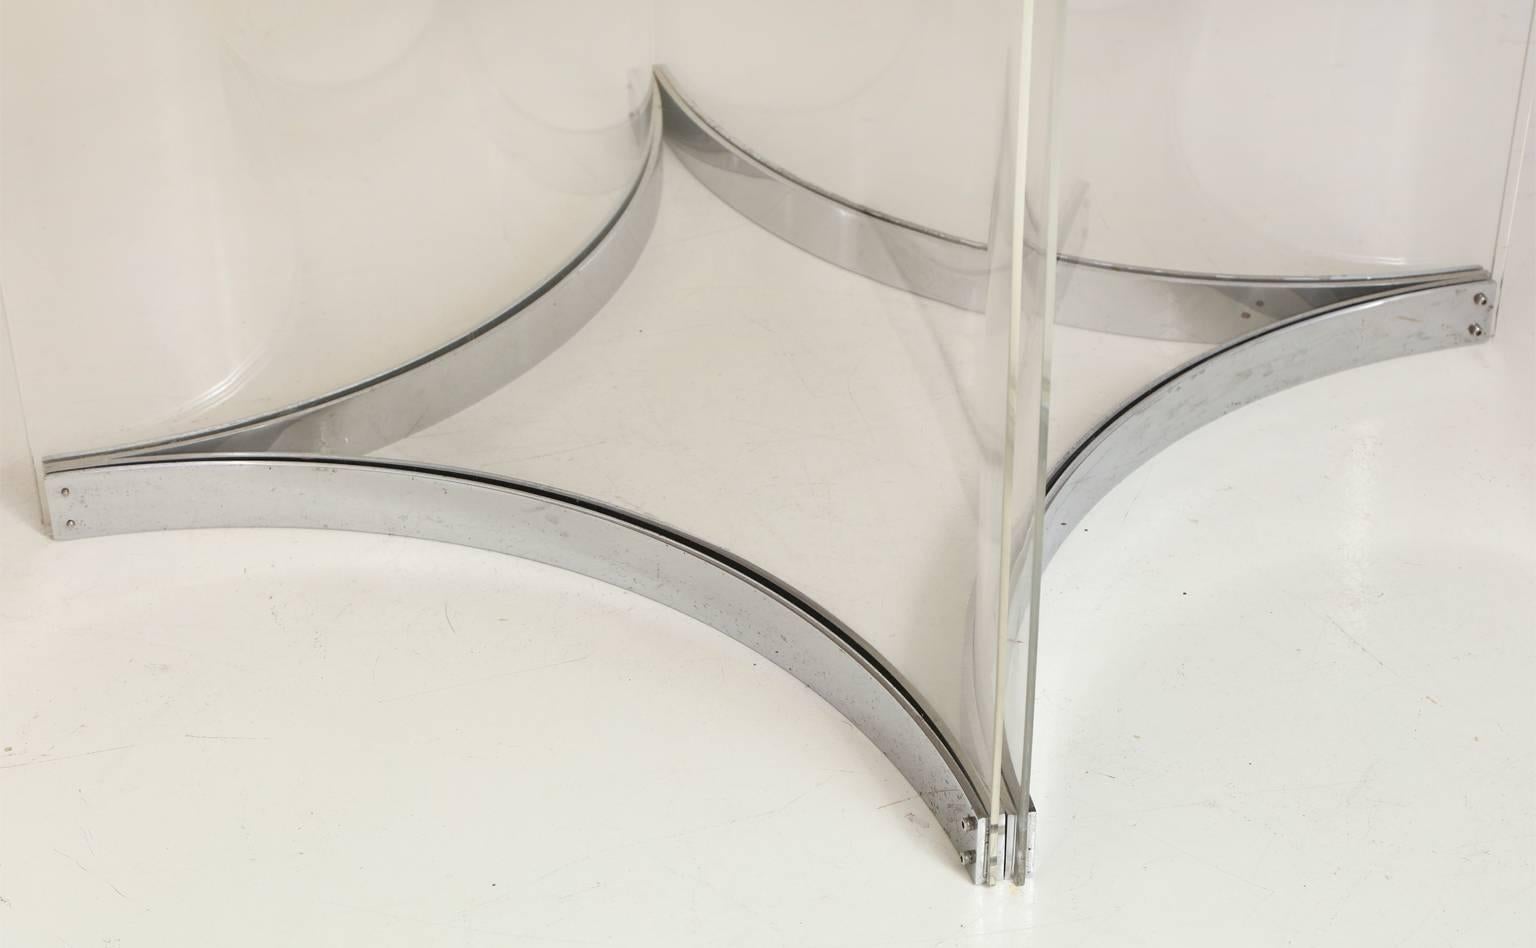 Alessandro Albrizzi (1934-1994).
Smoked-glass top round dining table with base in clear perspex and chromed steel trim. Four panels of hand-curved plexiglass sandwiched at top and bottom in a polished silver metal frame.  Albrizzi was a darling of